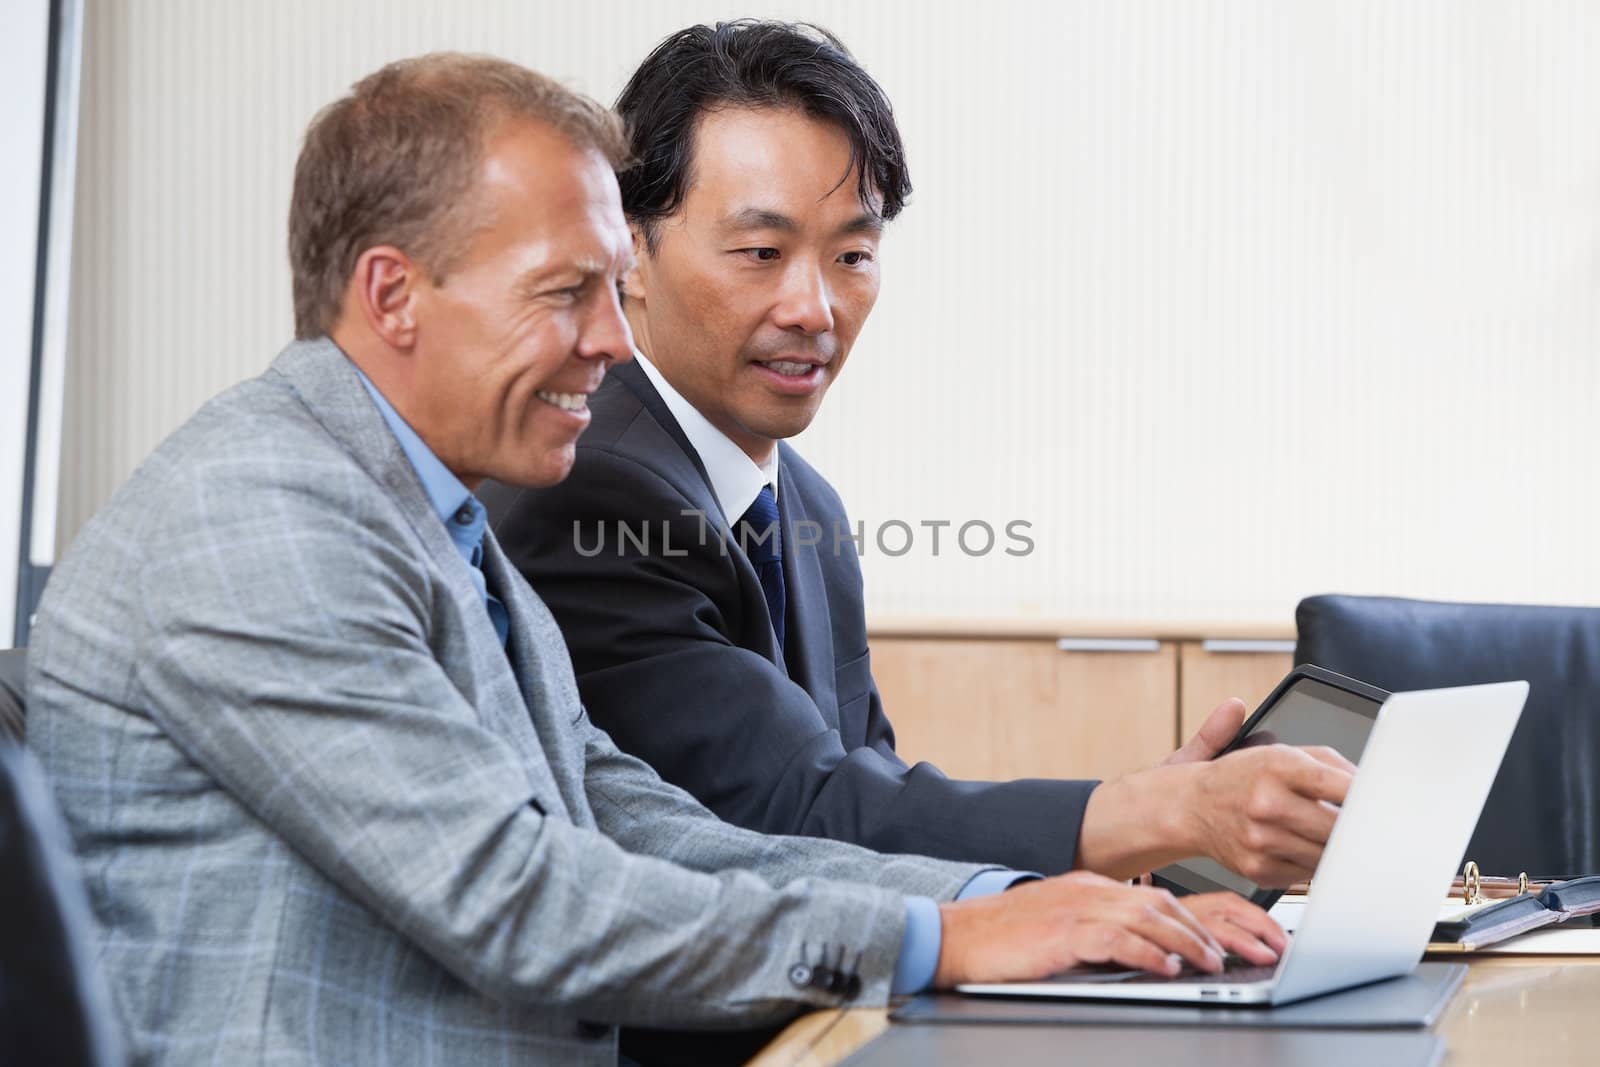 Colleagues working together on a computer by leaf